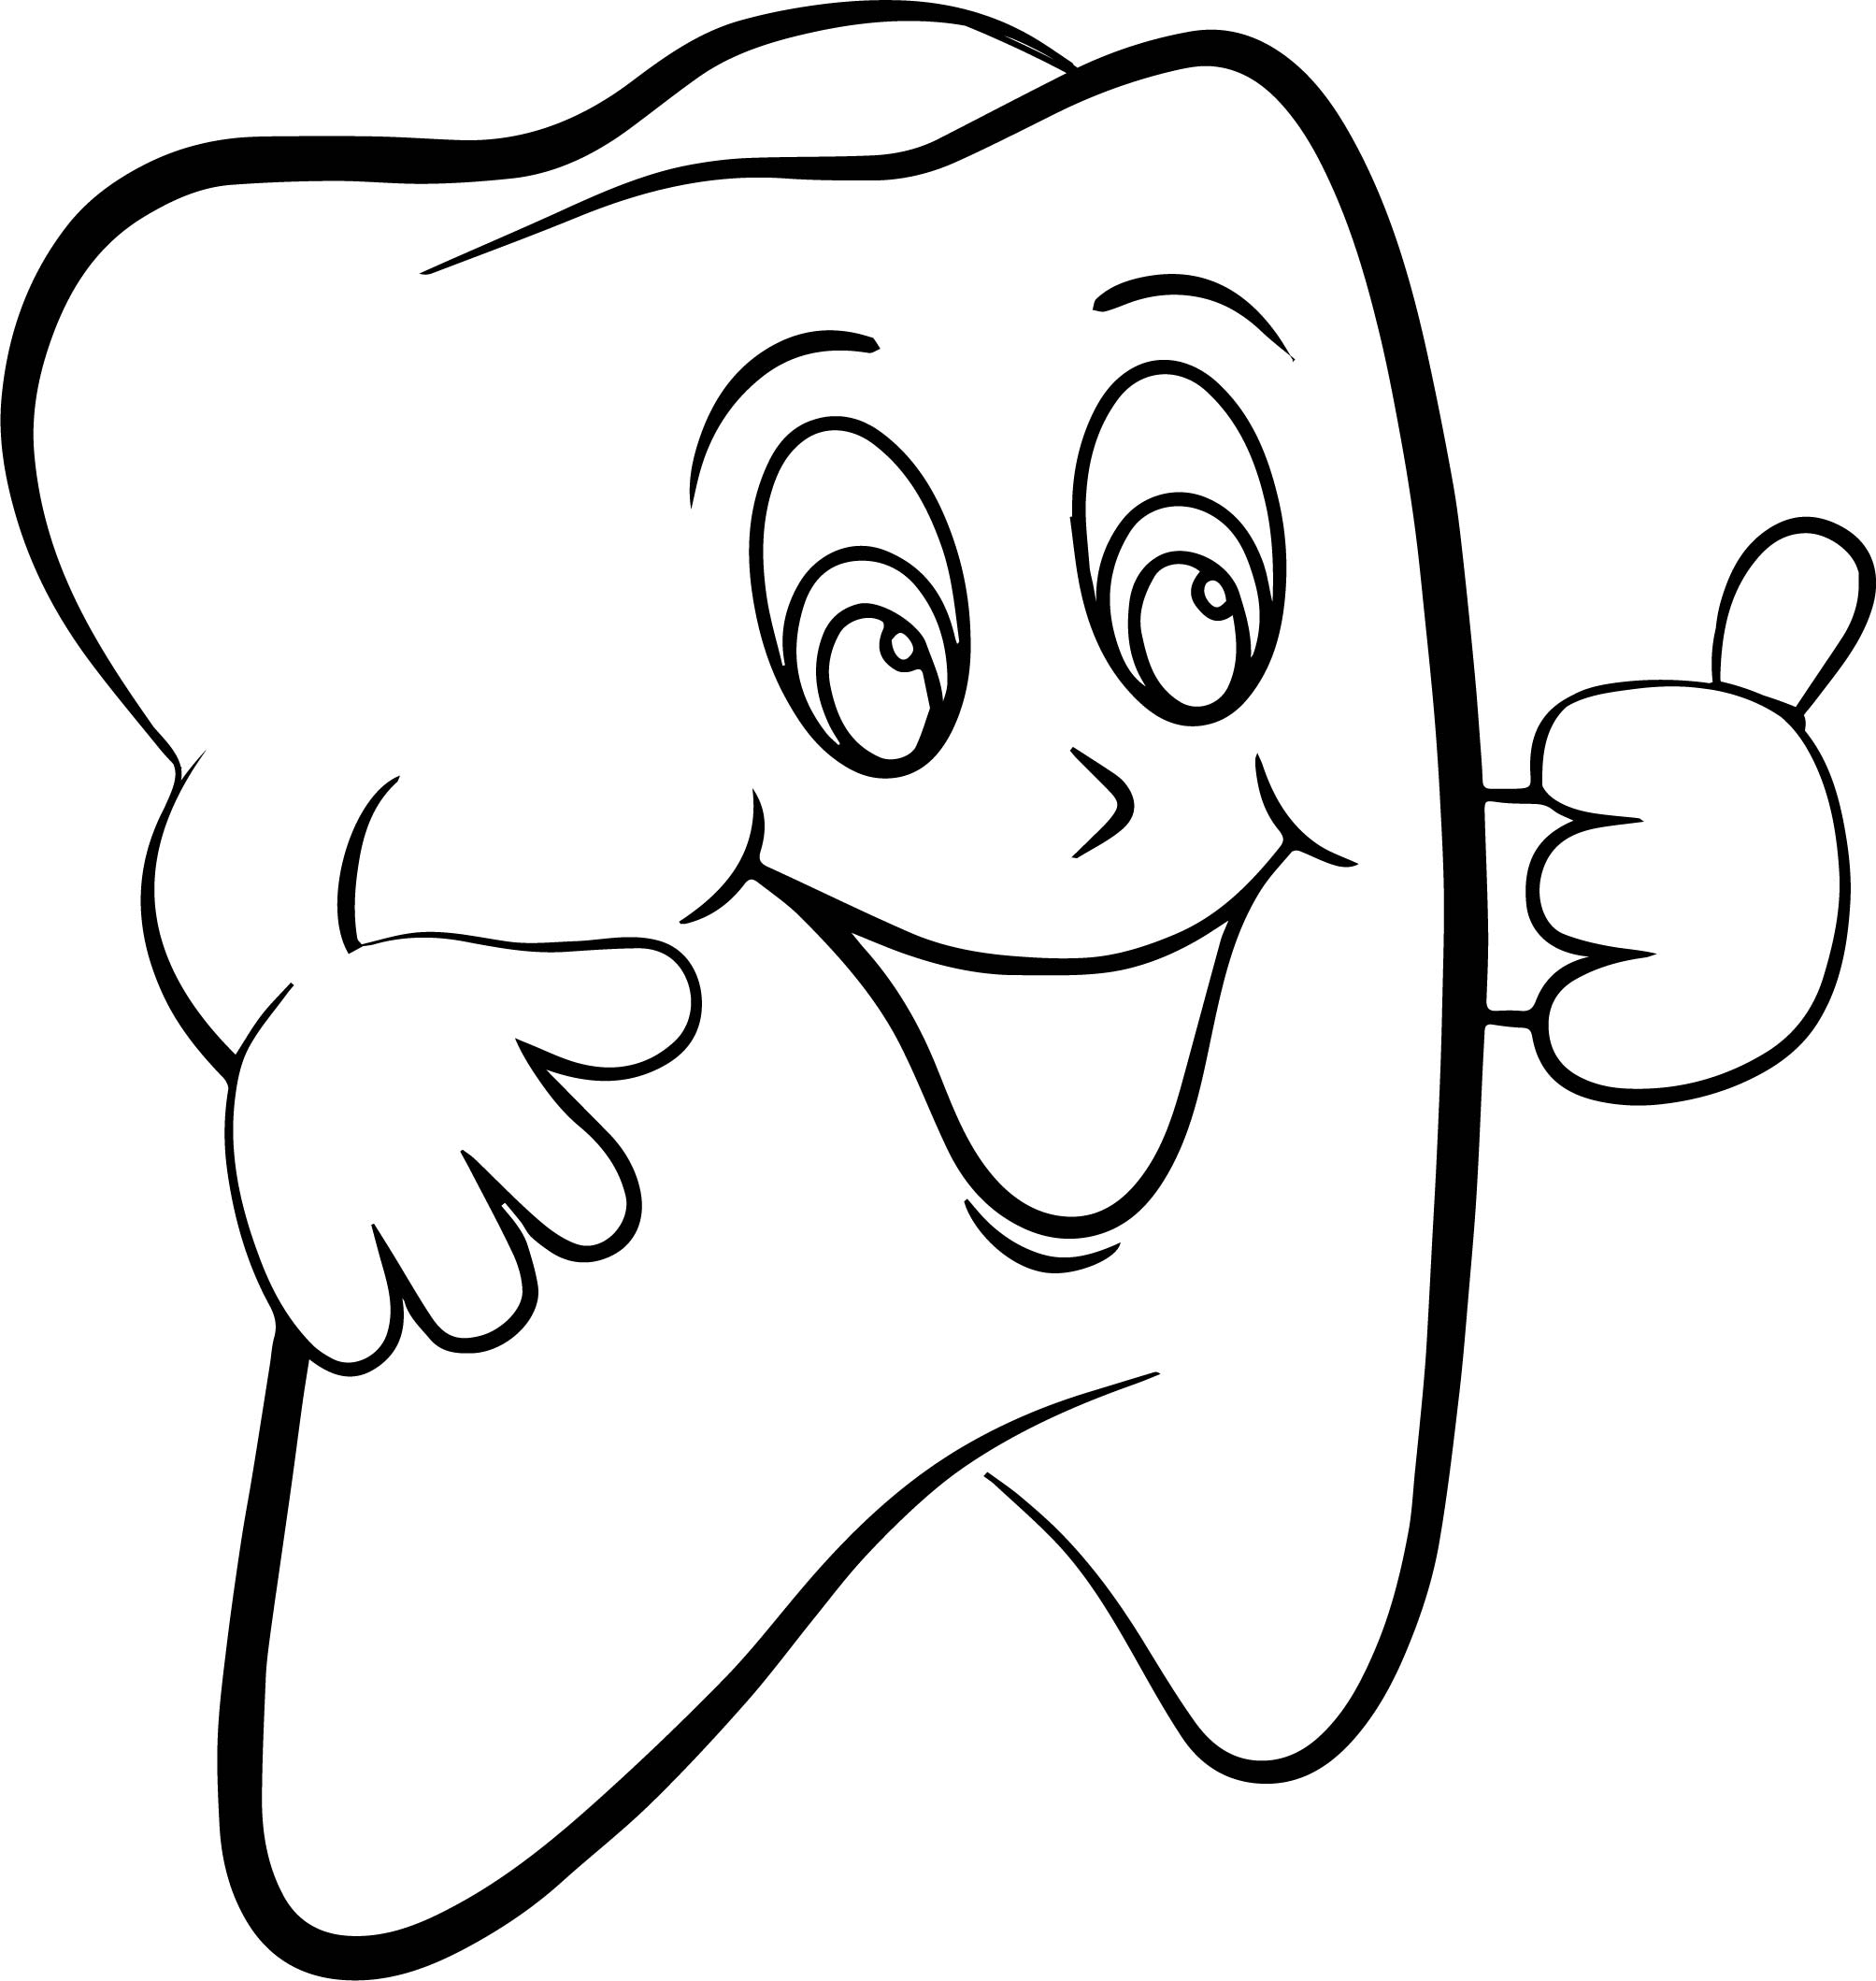 Dental Health Coloring Pages at Free printable